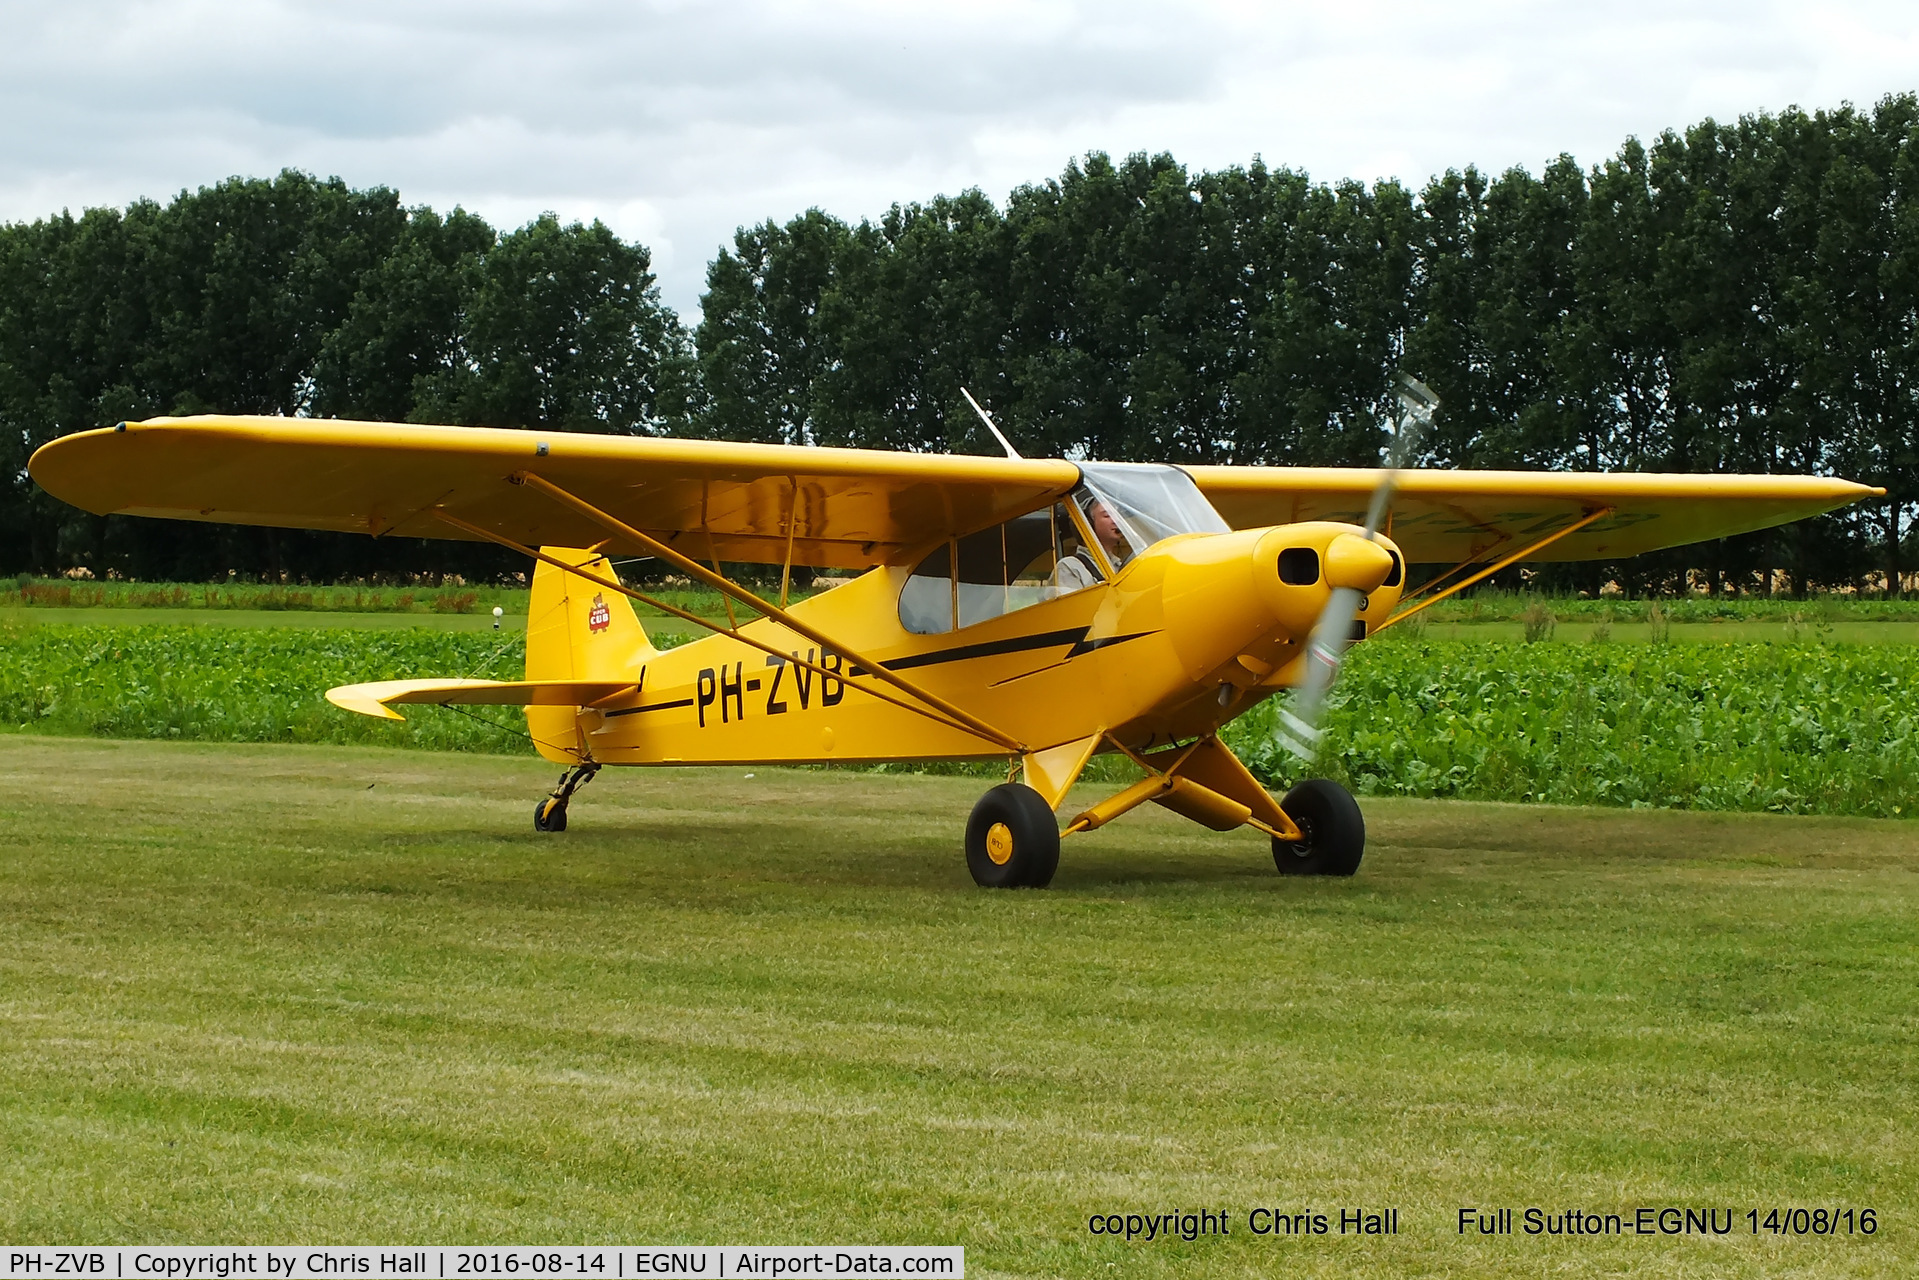 PH-ZVB, 1976 Piper PA-18-150 Super Cub Super Cub C/N 18-7609021, at the LAA Vale of York Strut fly-in, Full Sutton